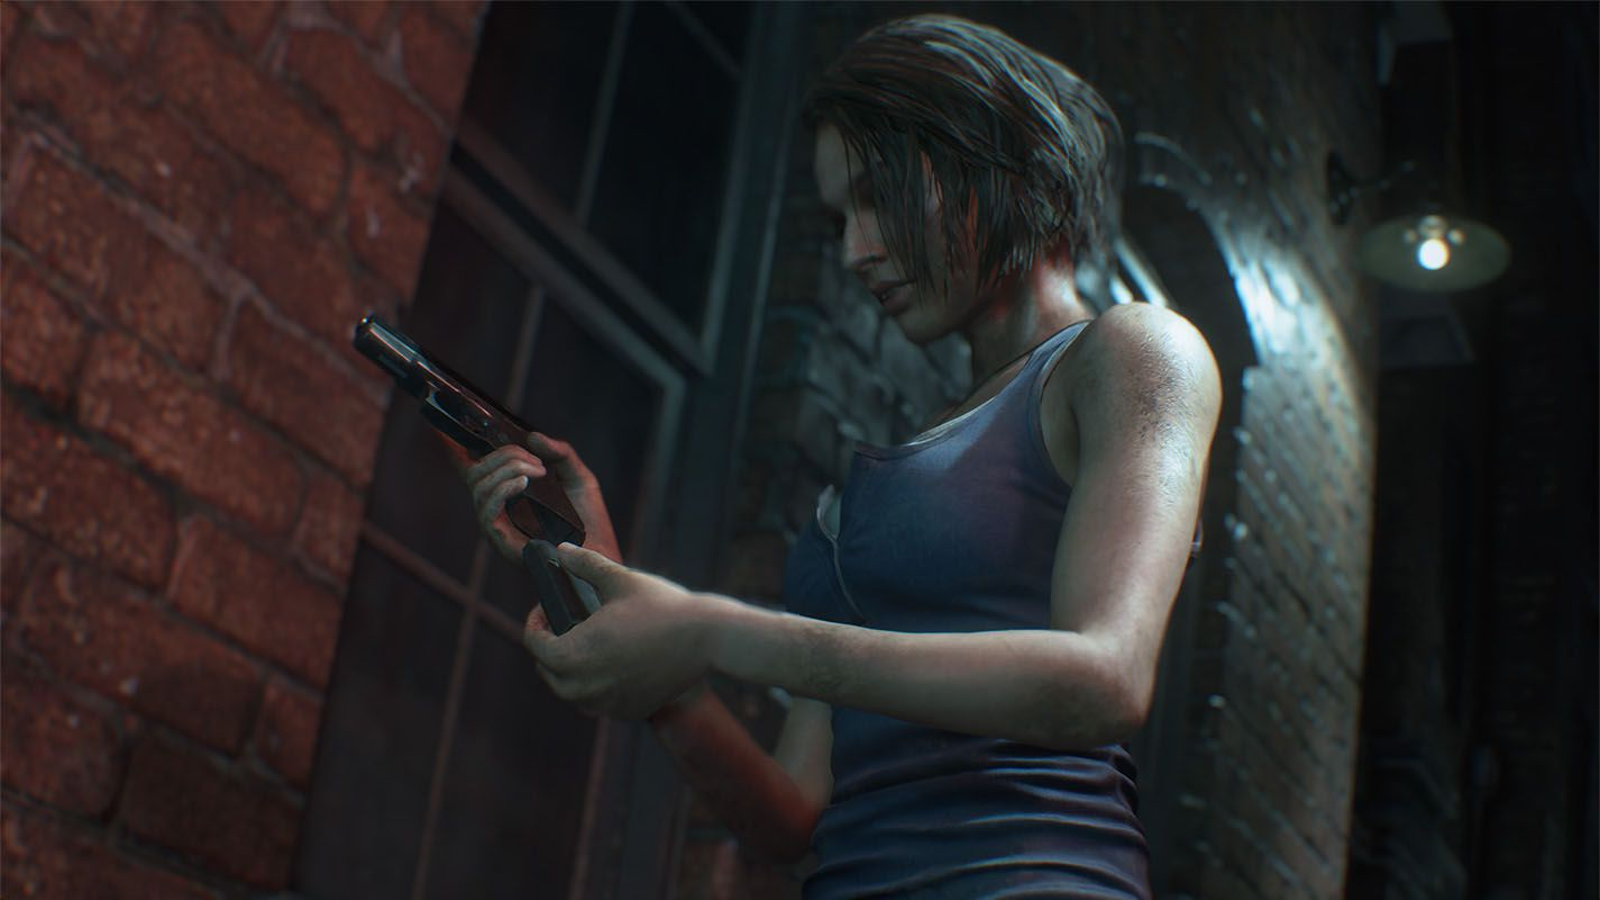 Resident Evil 3' remake hits PS4, Xbox One and PC on April 3rd